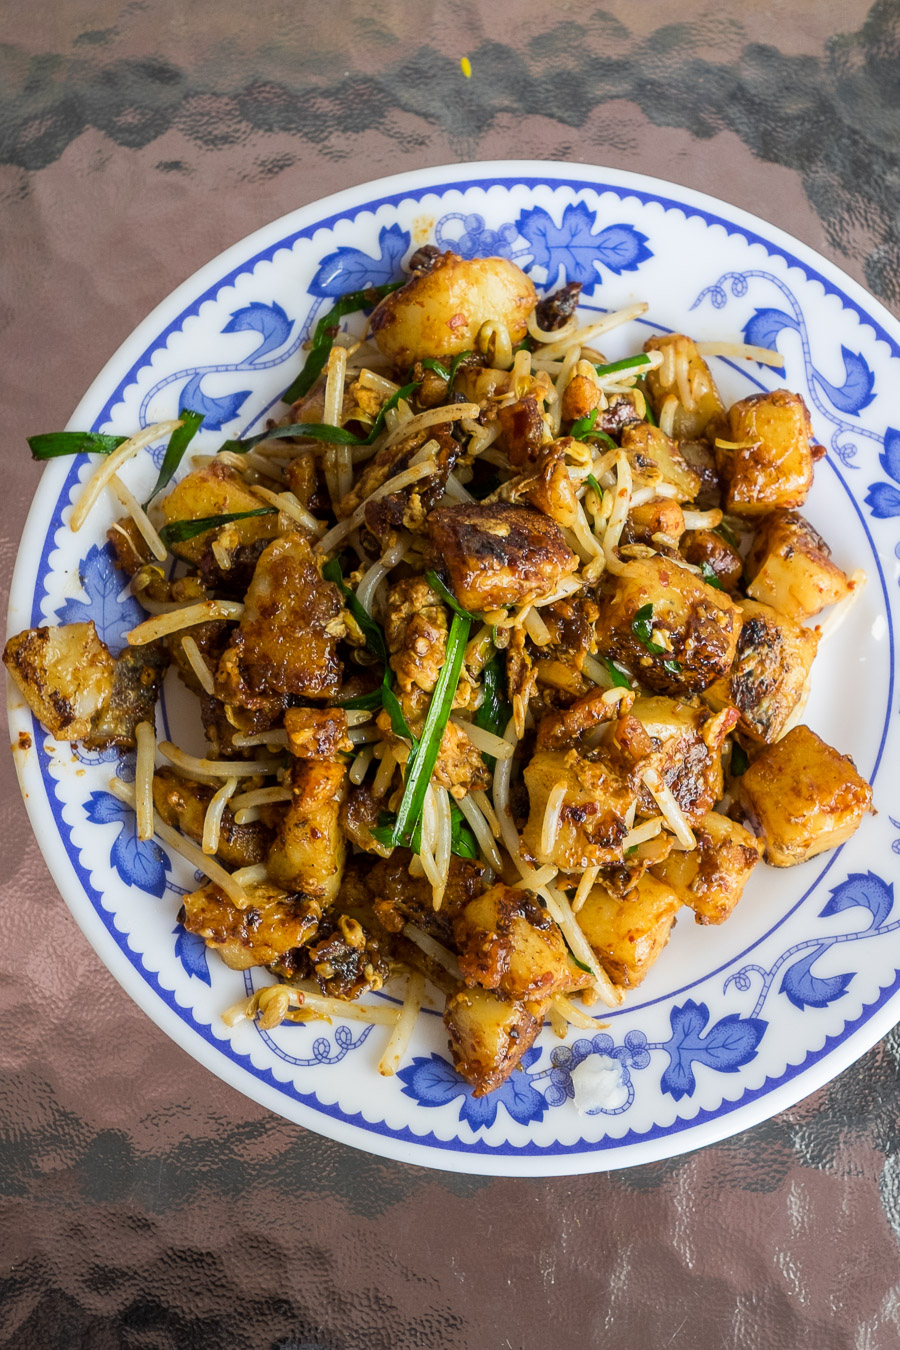 Chai tow kway (radish cake)  - only available on weekends.